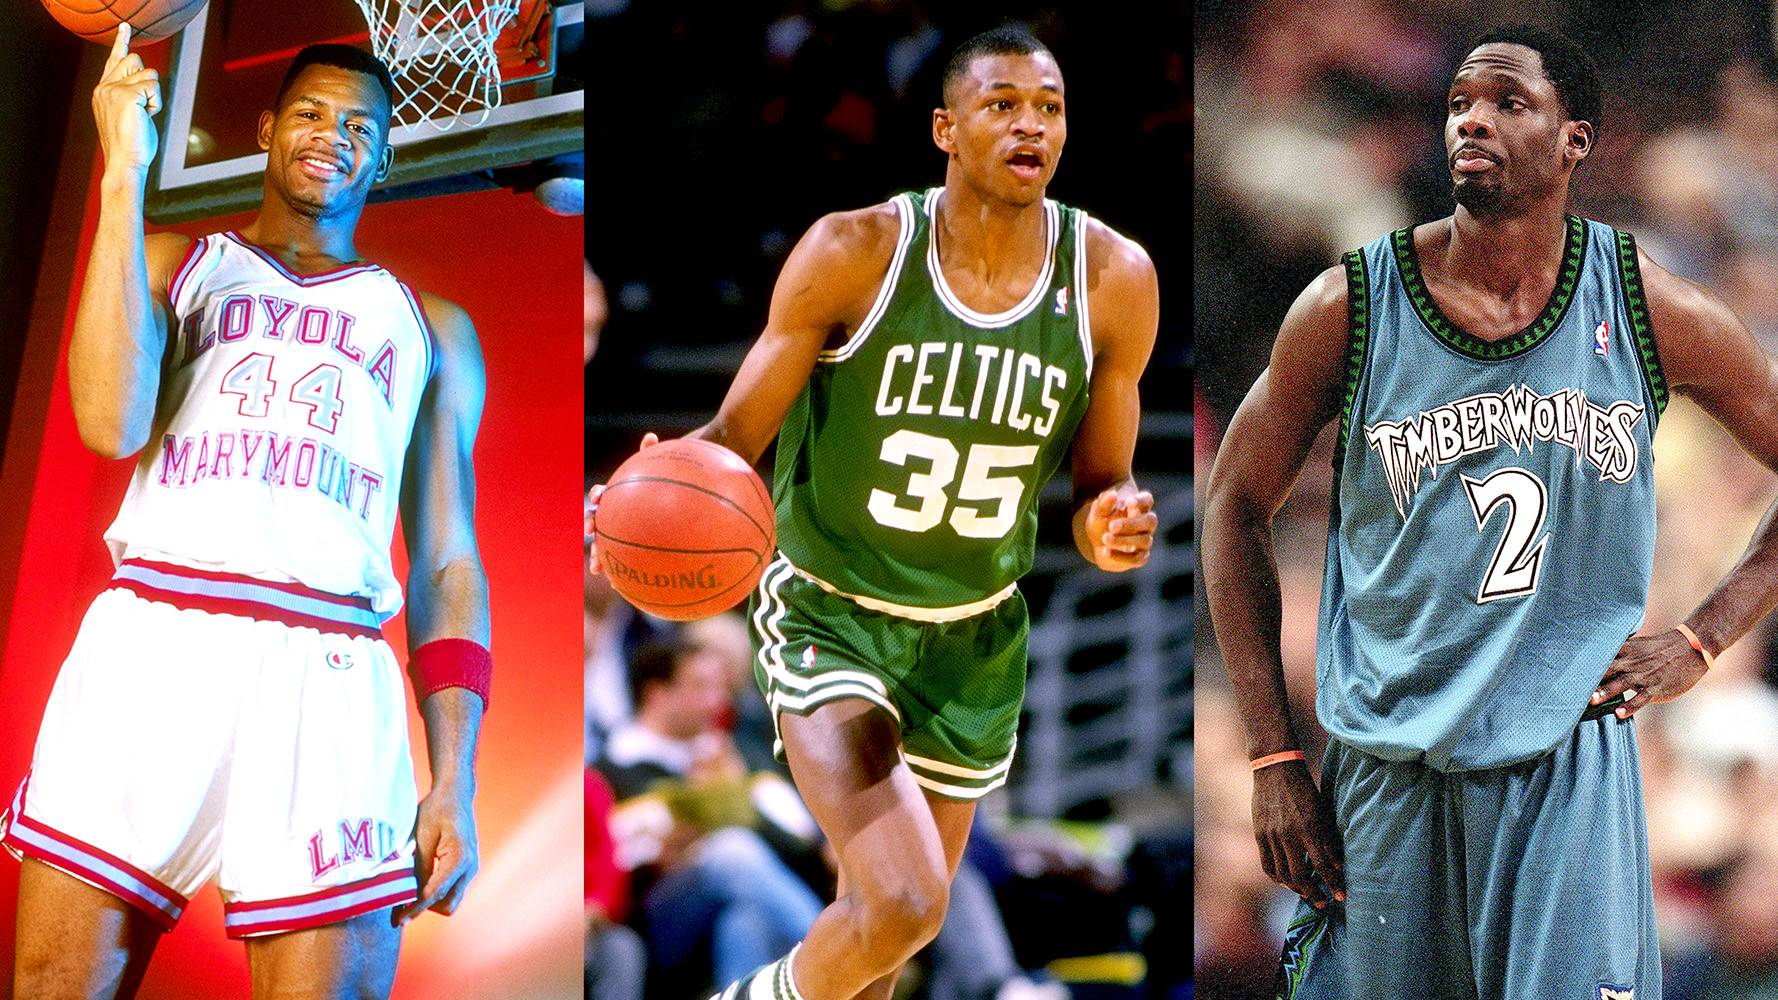 Len Bias: The player who was 'a little bit ahead' of Michael